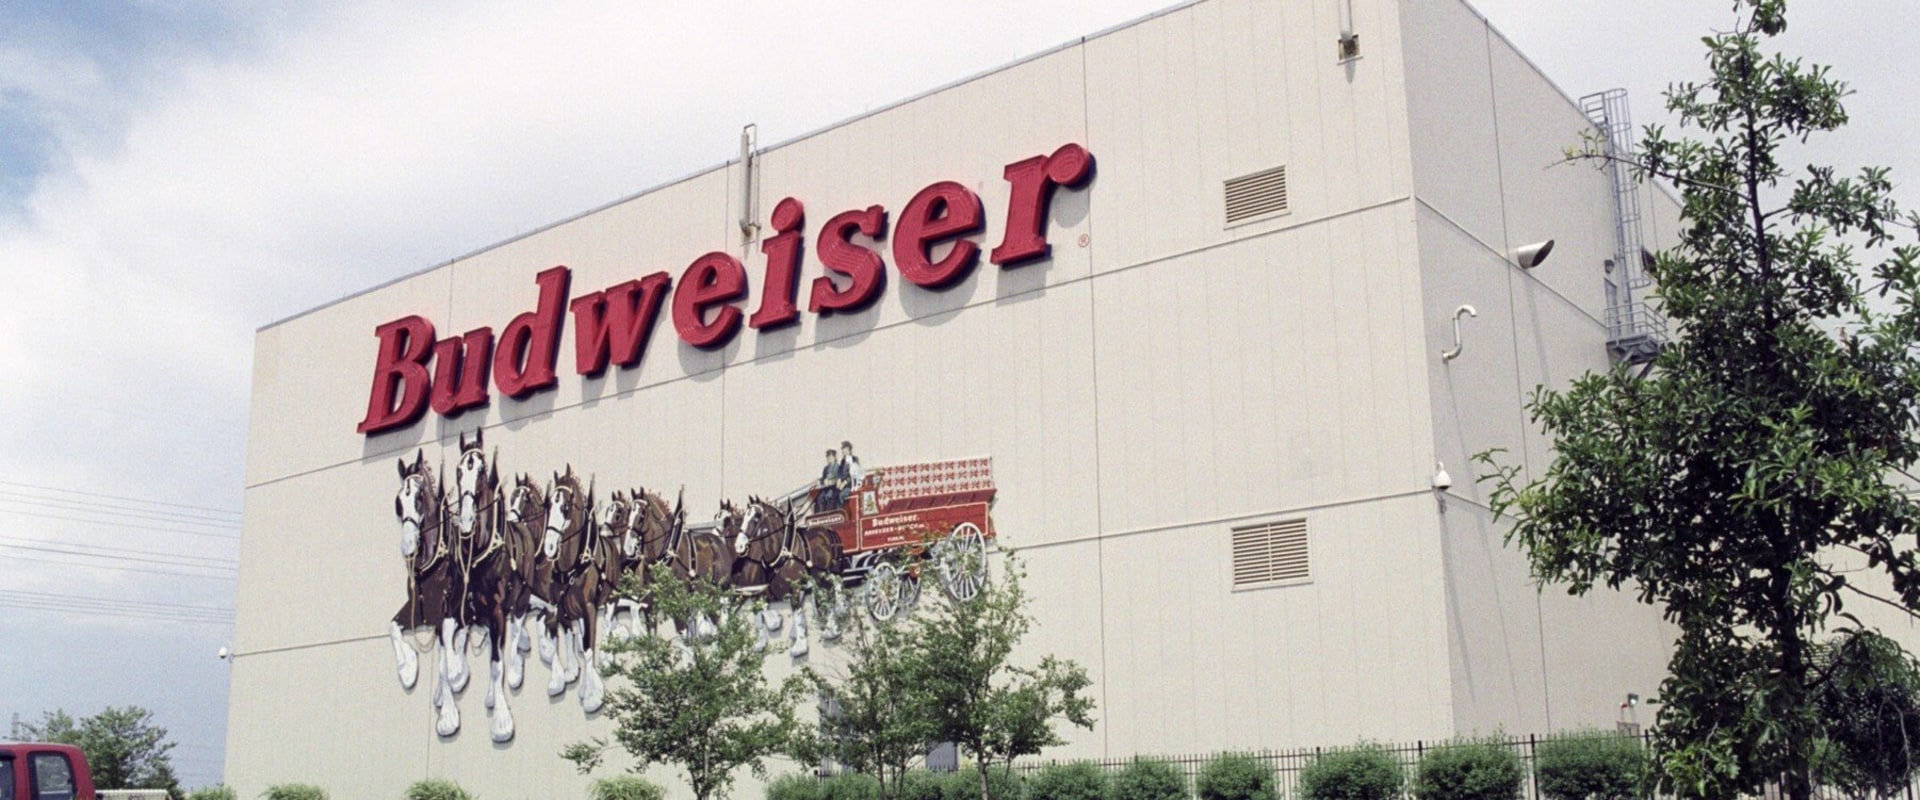 Where is budweiser brewed in the us?